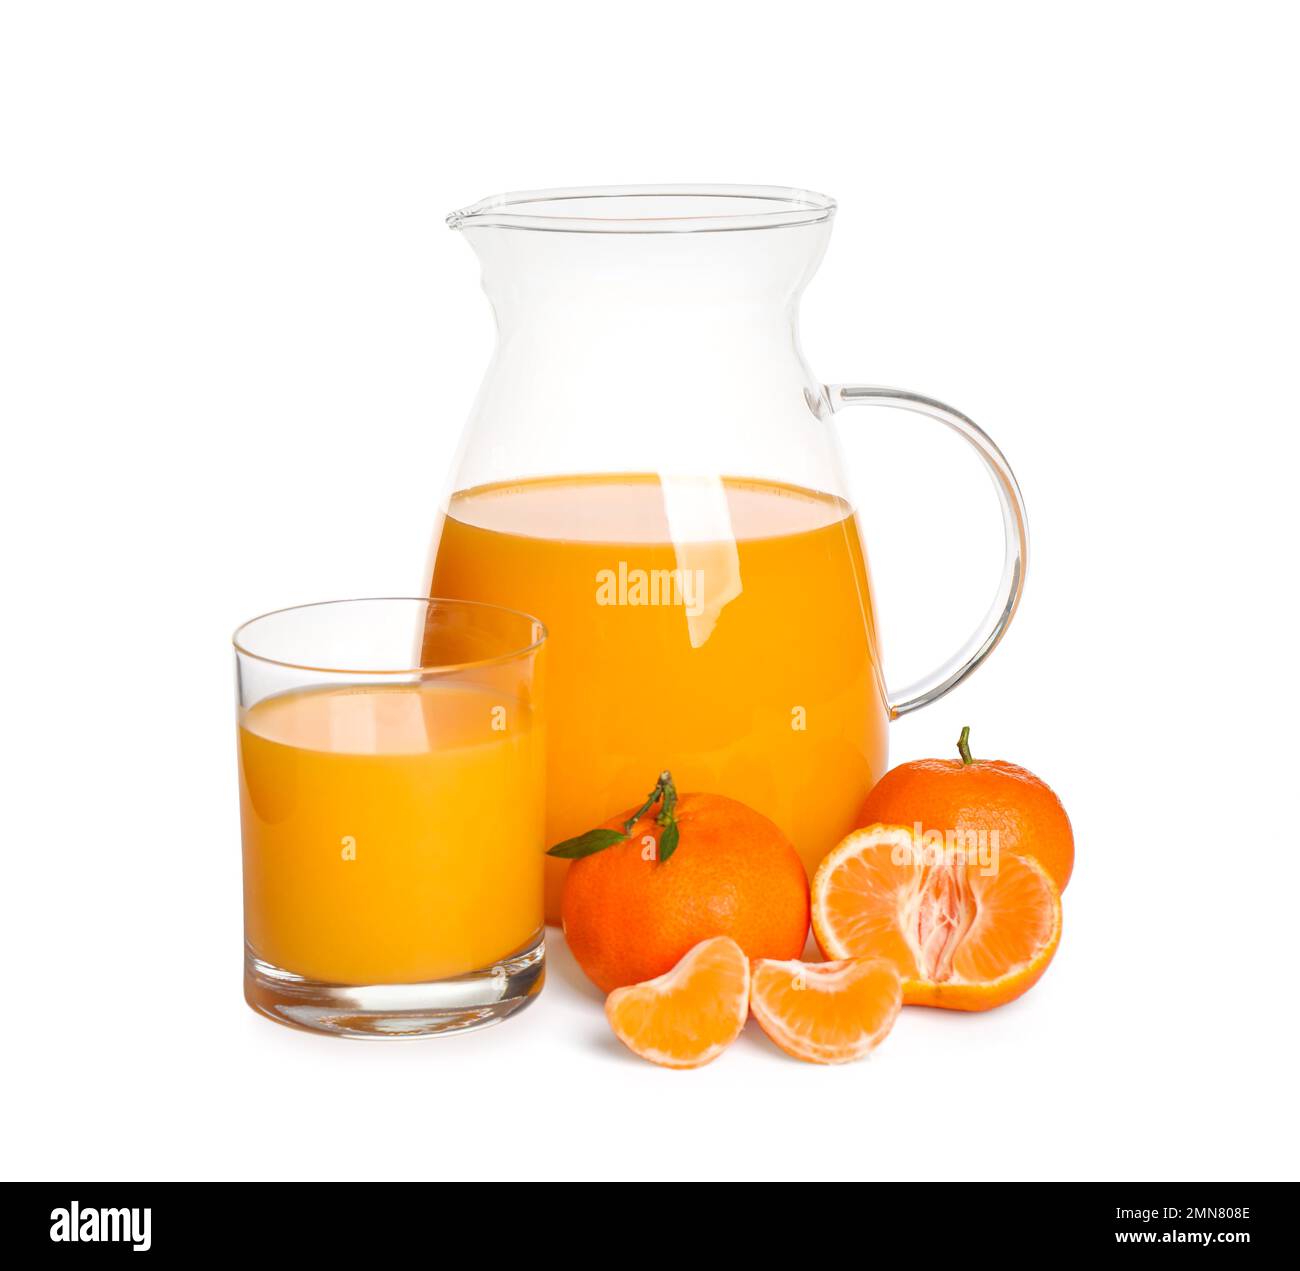 https://c8.alamy.com/comp/2MN808E/jug-and-glass-of-tangerine-juice-with-fruits-isolated-on-white-2MN808E.jpg